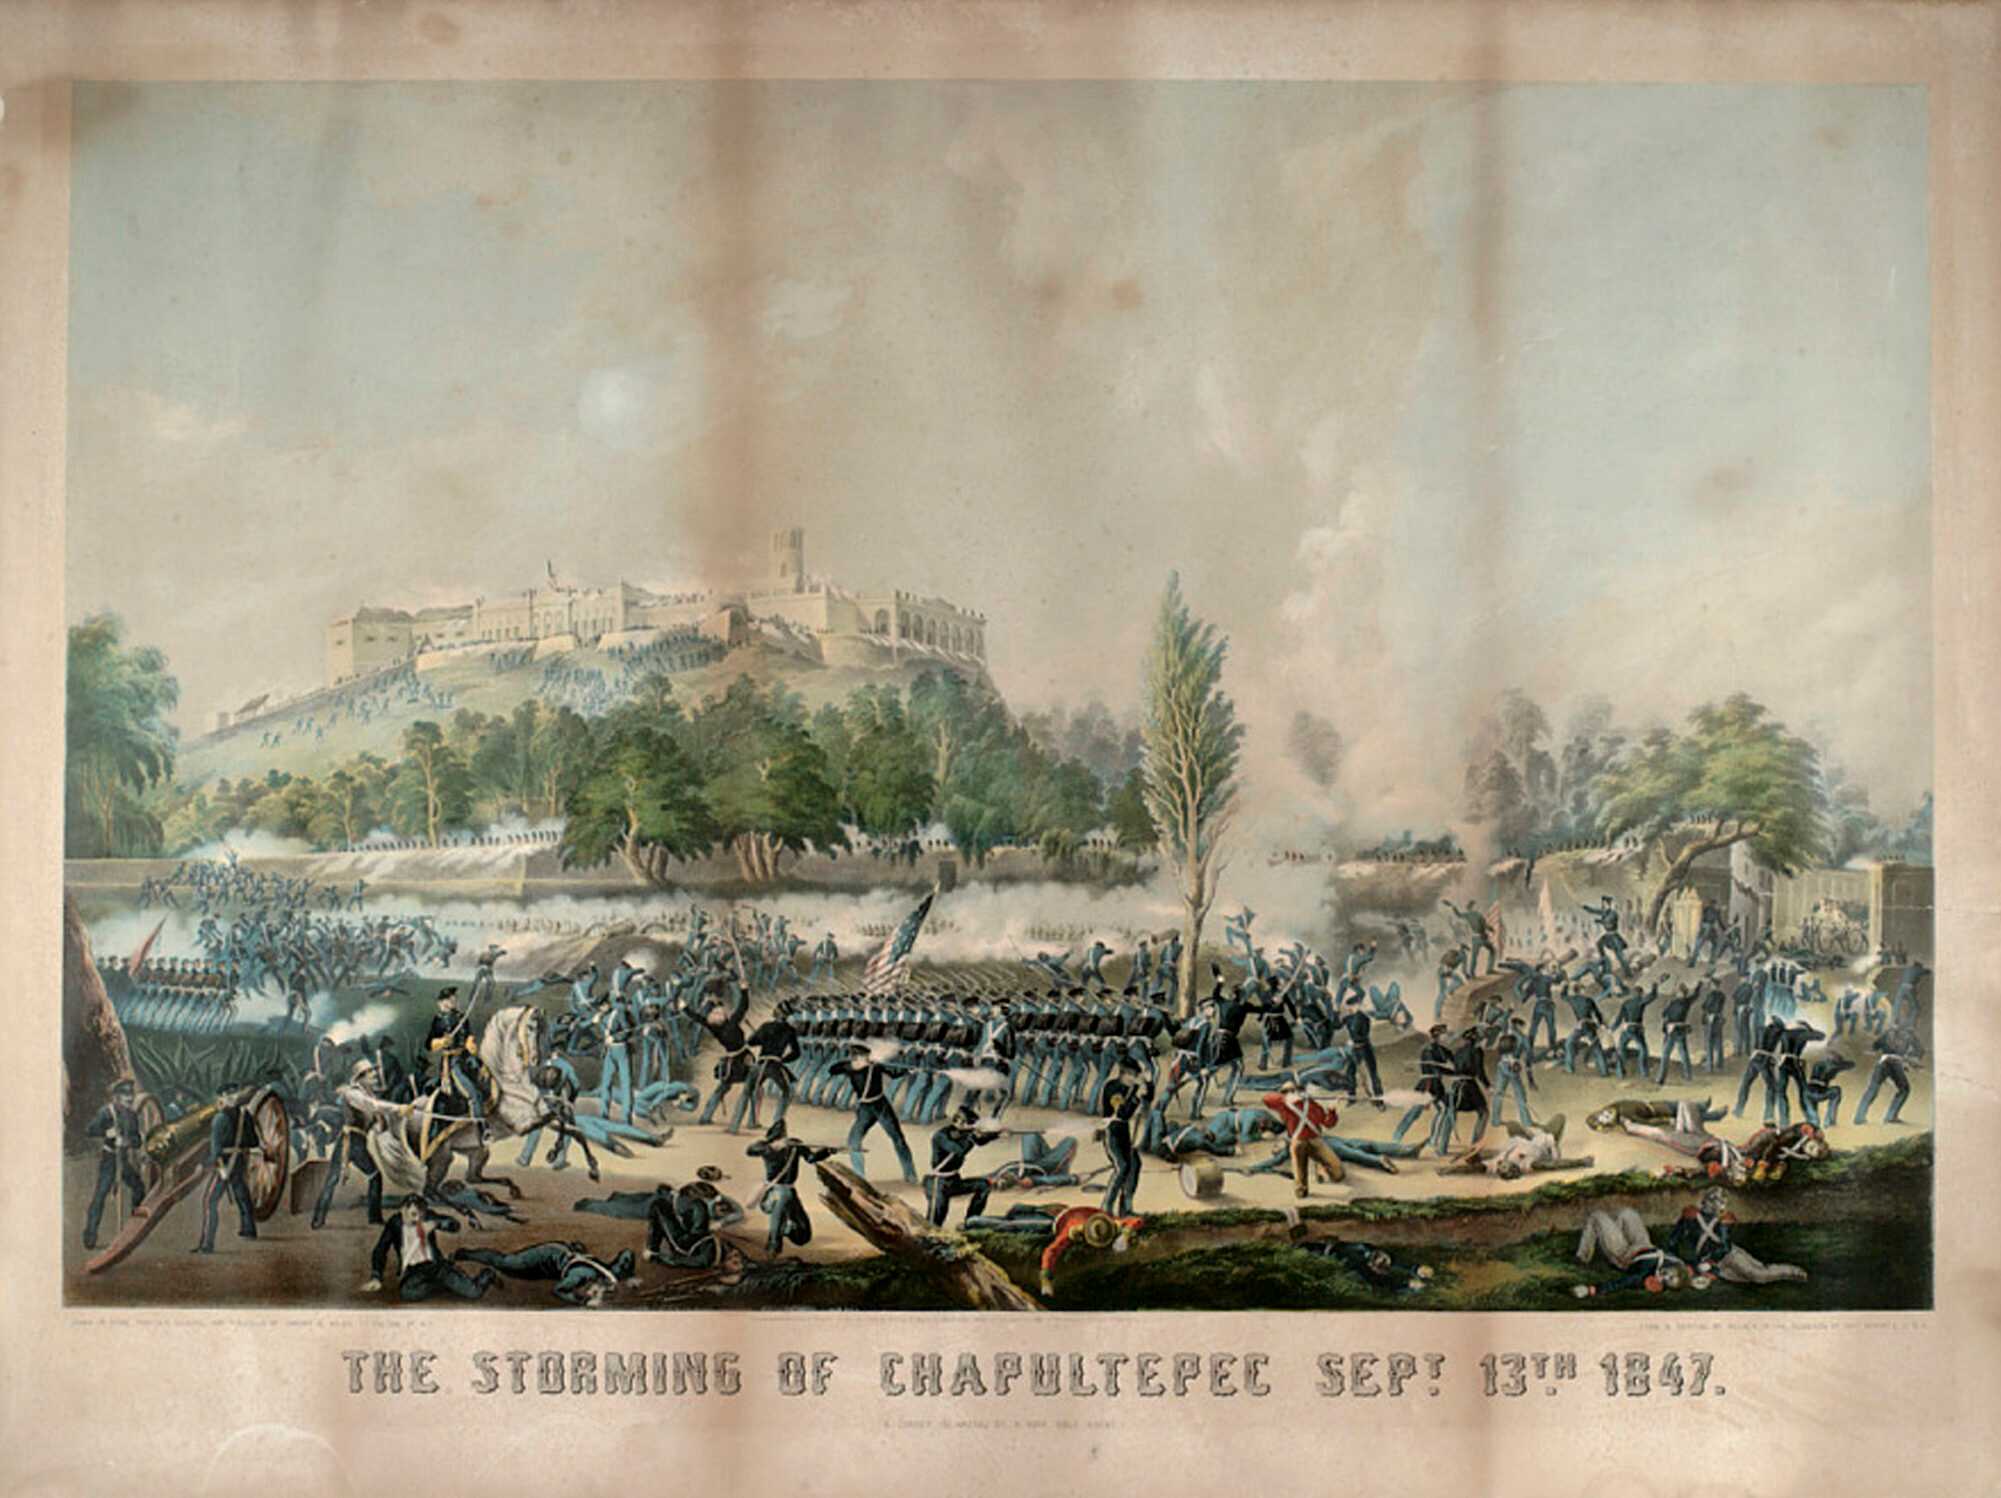 Illustration of the Storming of Chapultepec